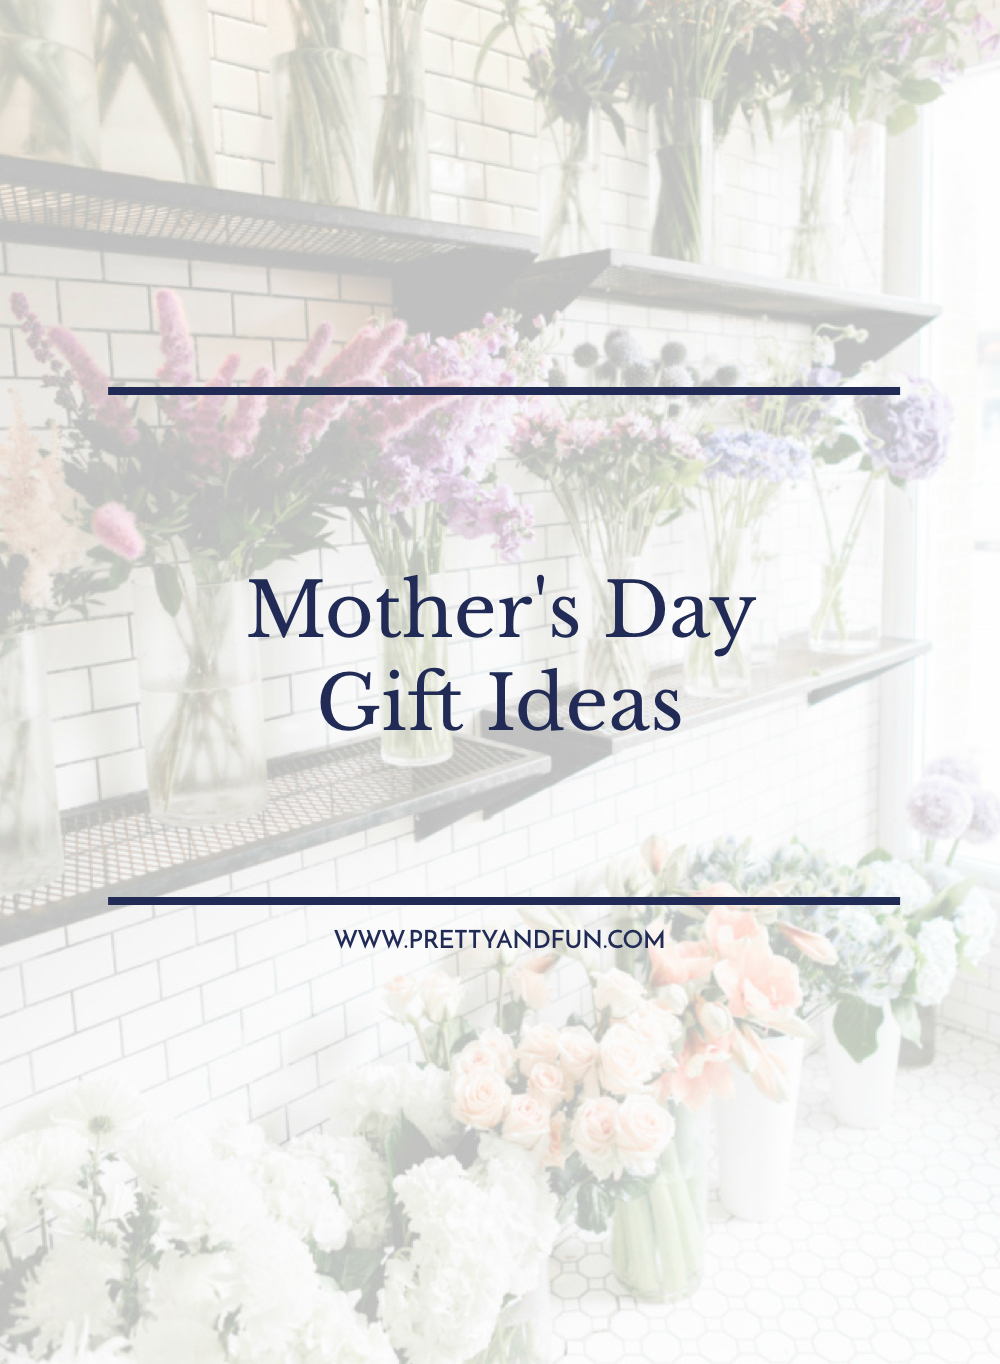 Mother's Day Gift Ideas.